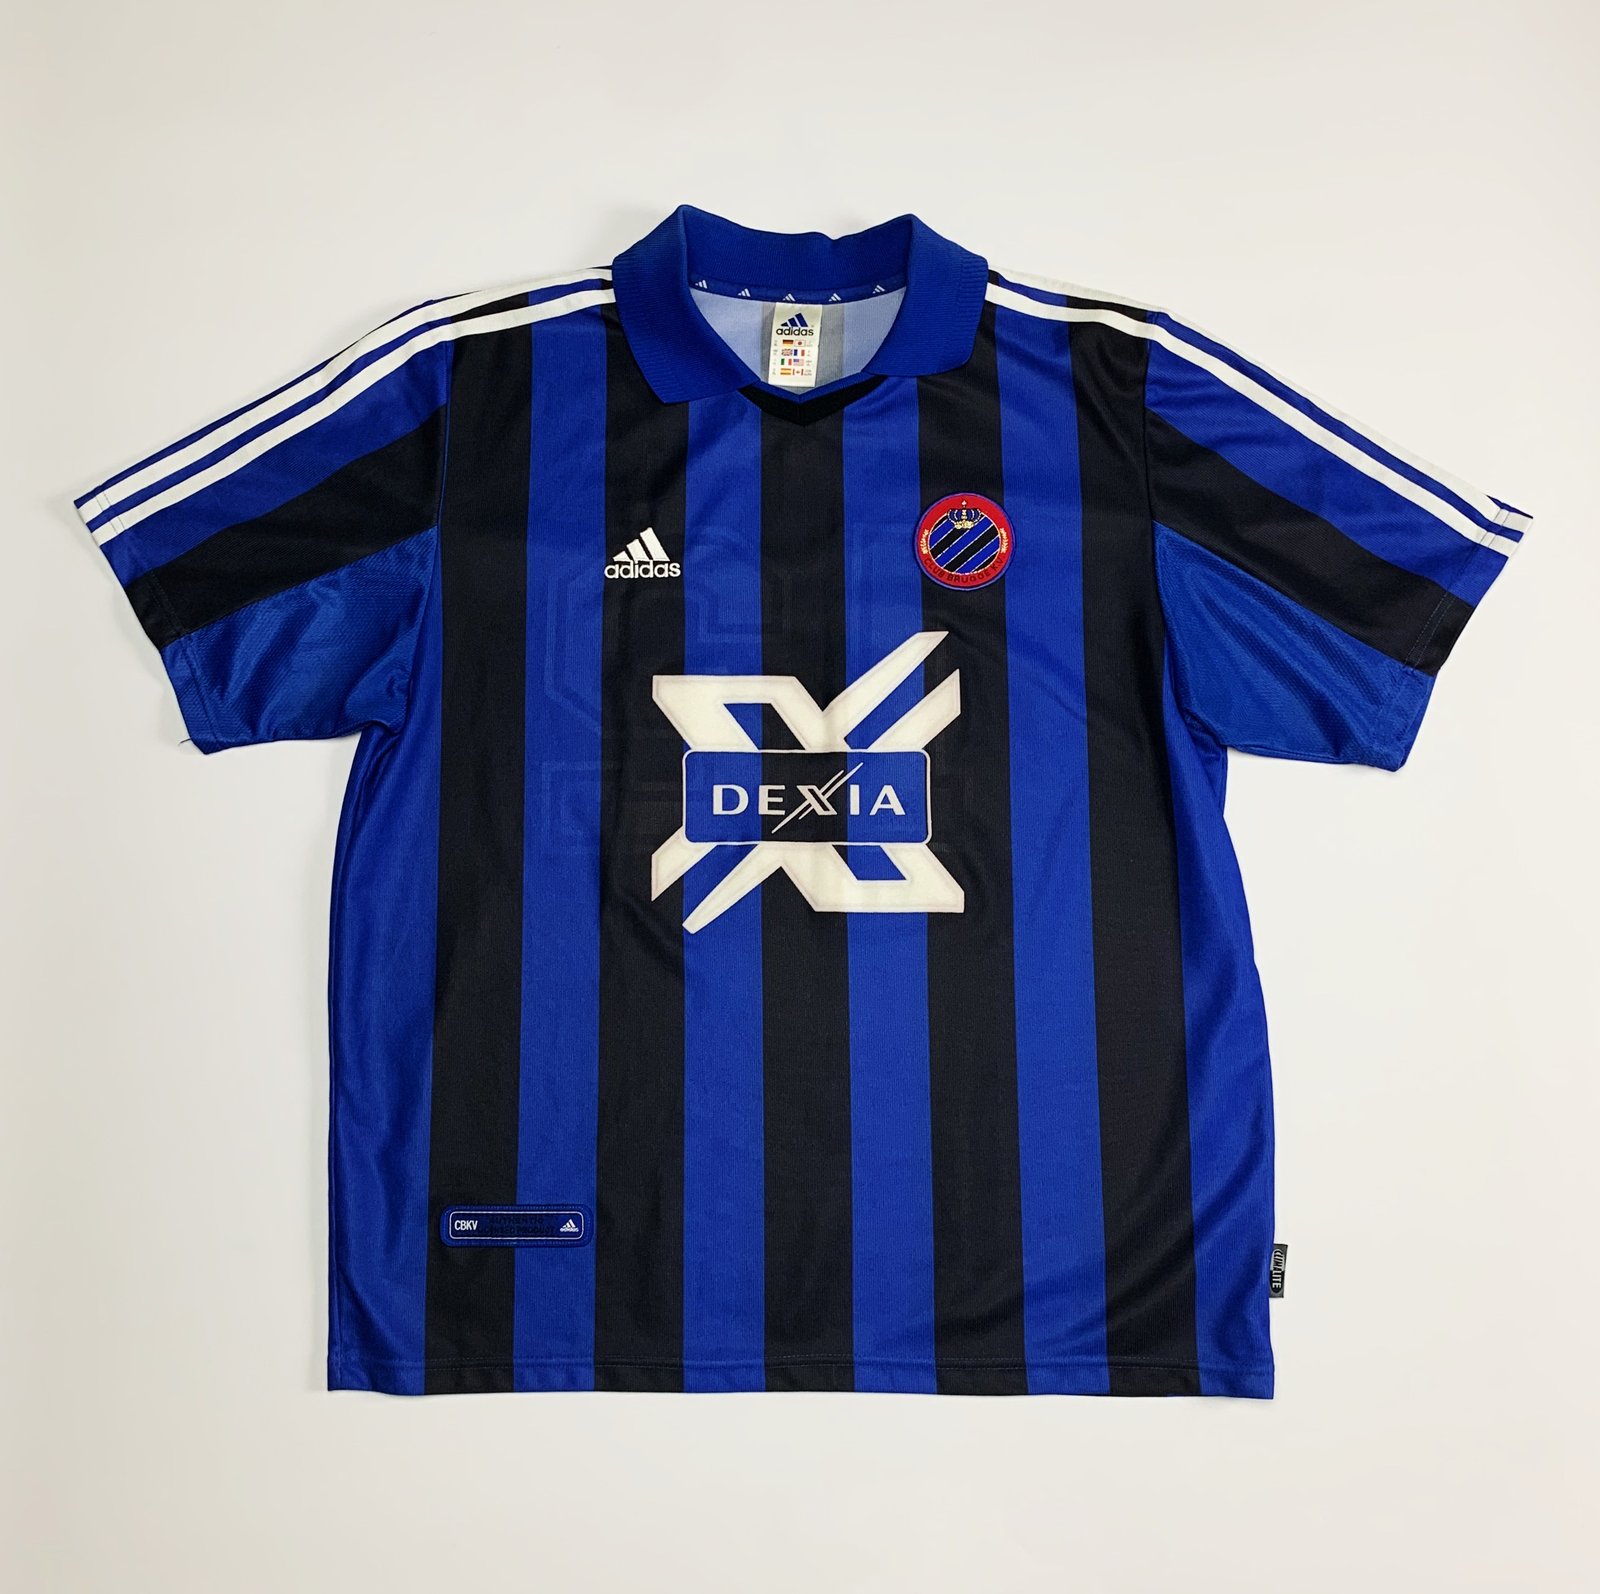 CLUB BRUGGE'S NEW HOME JERSEY, BLACK AND BLUE WITH GOLD ACCENTS